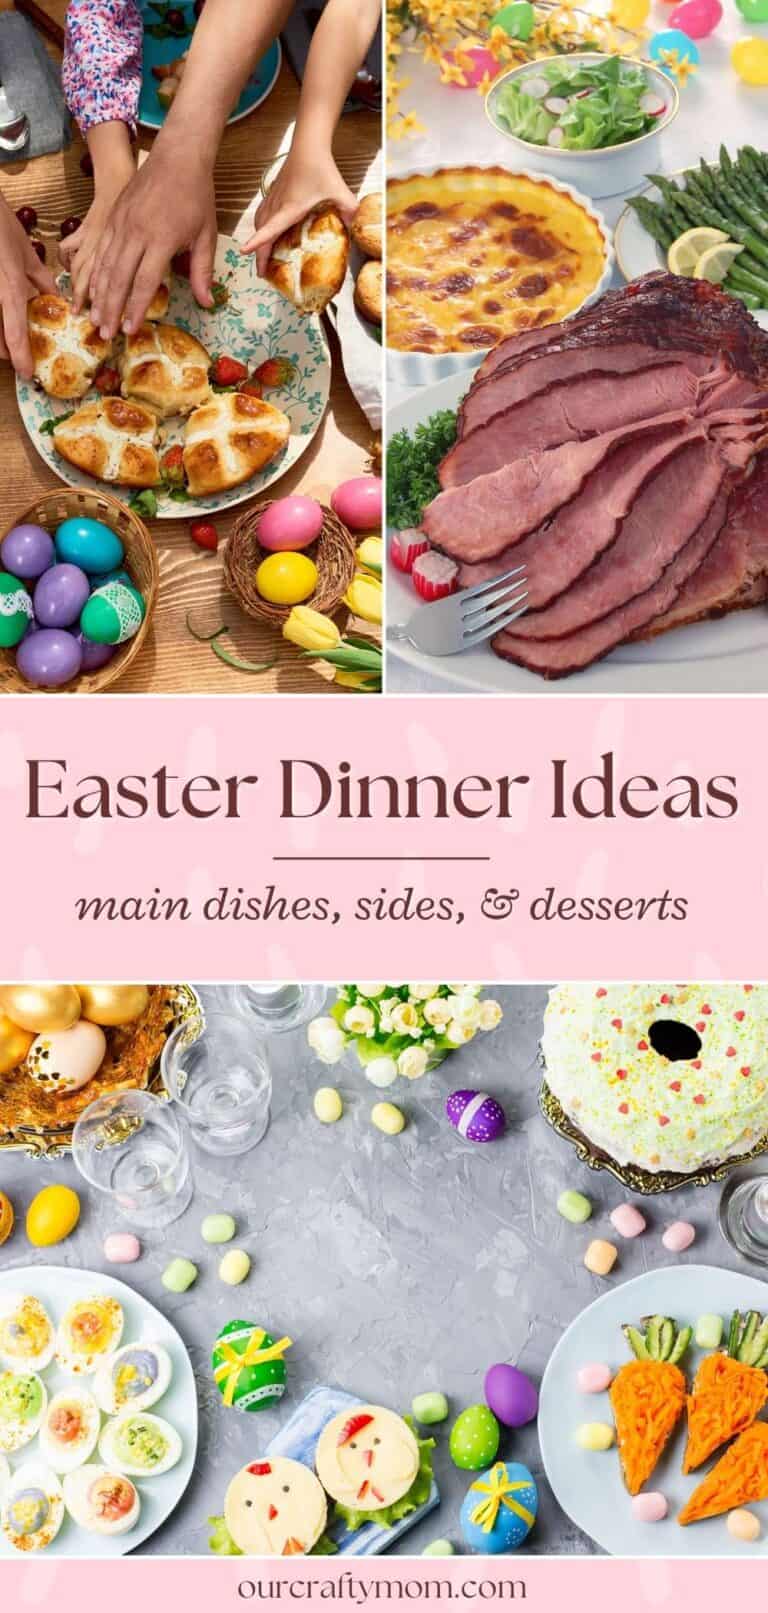 29 Mouthwatering Easter Dinner Ideas That Are Surprisingly Easy